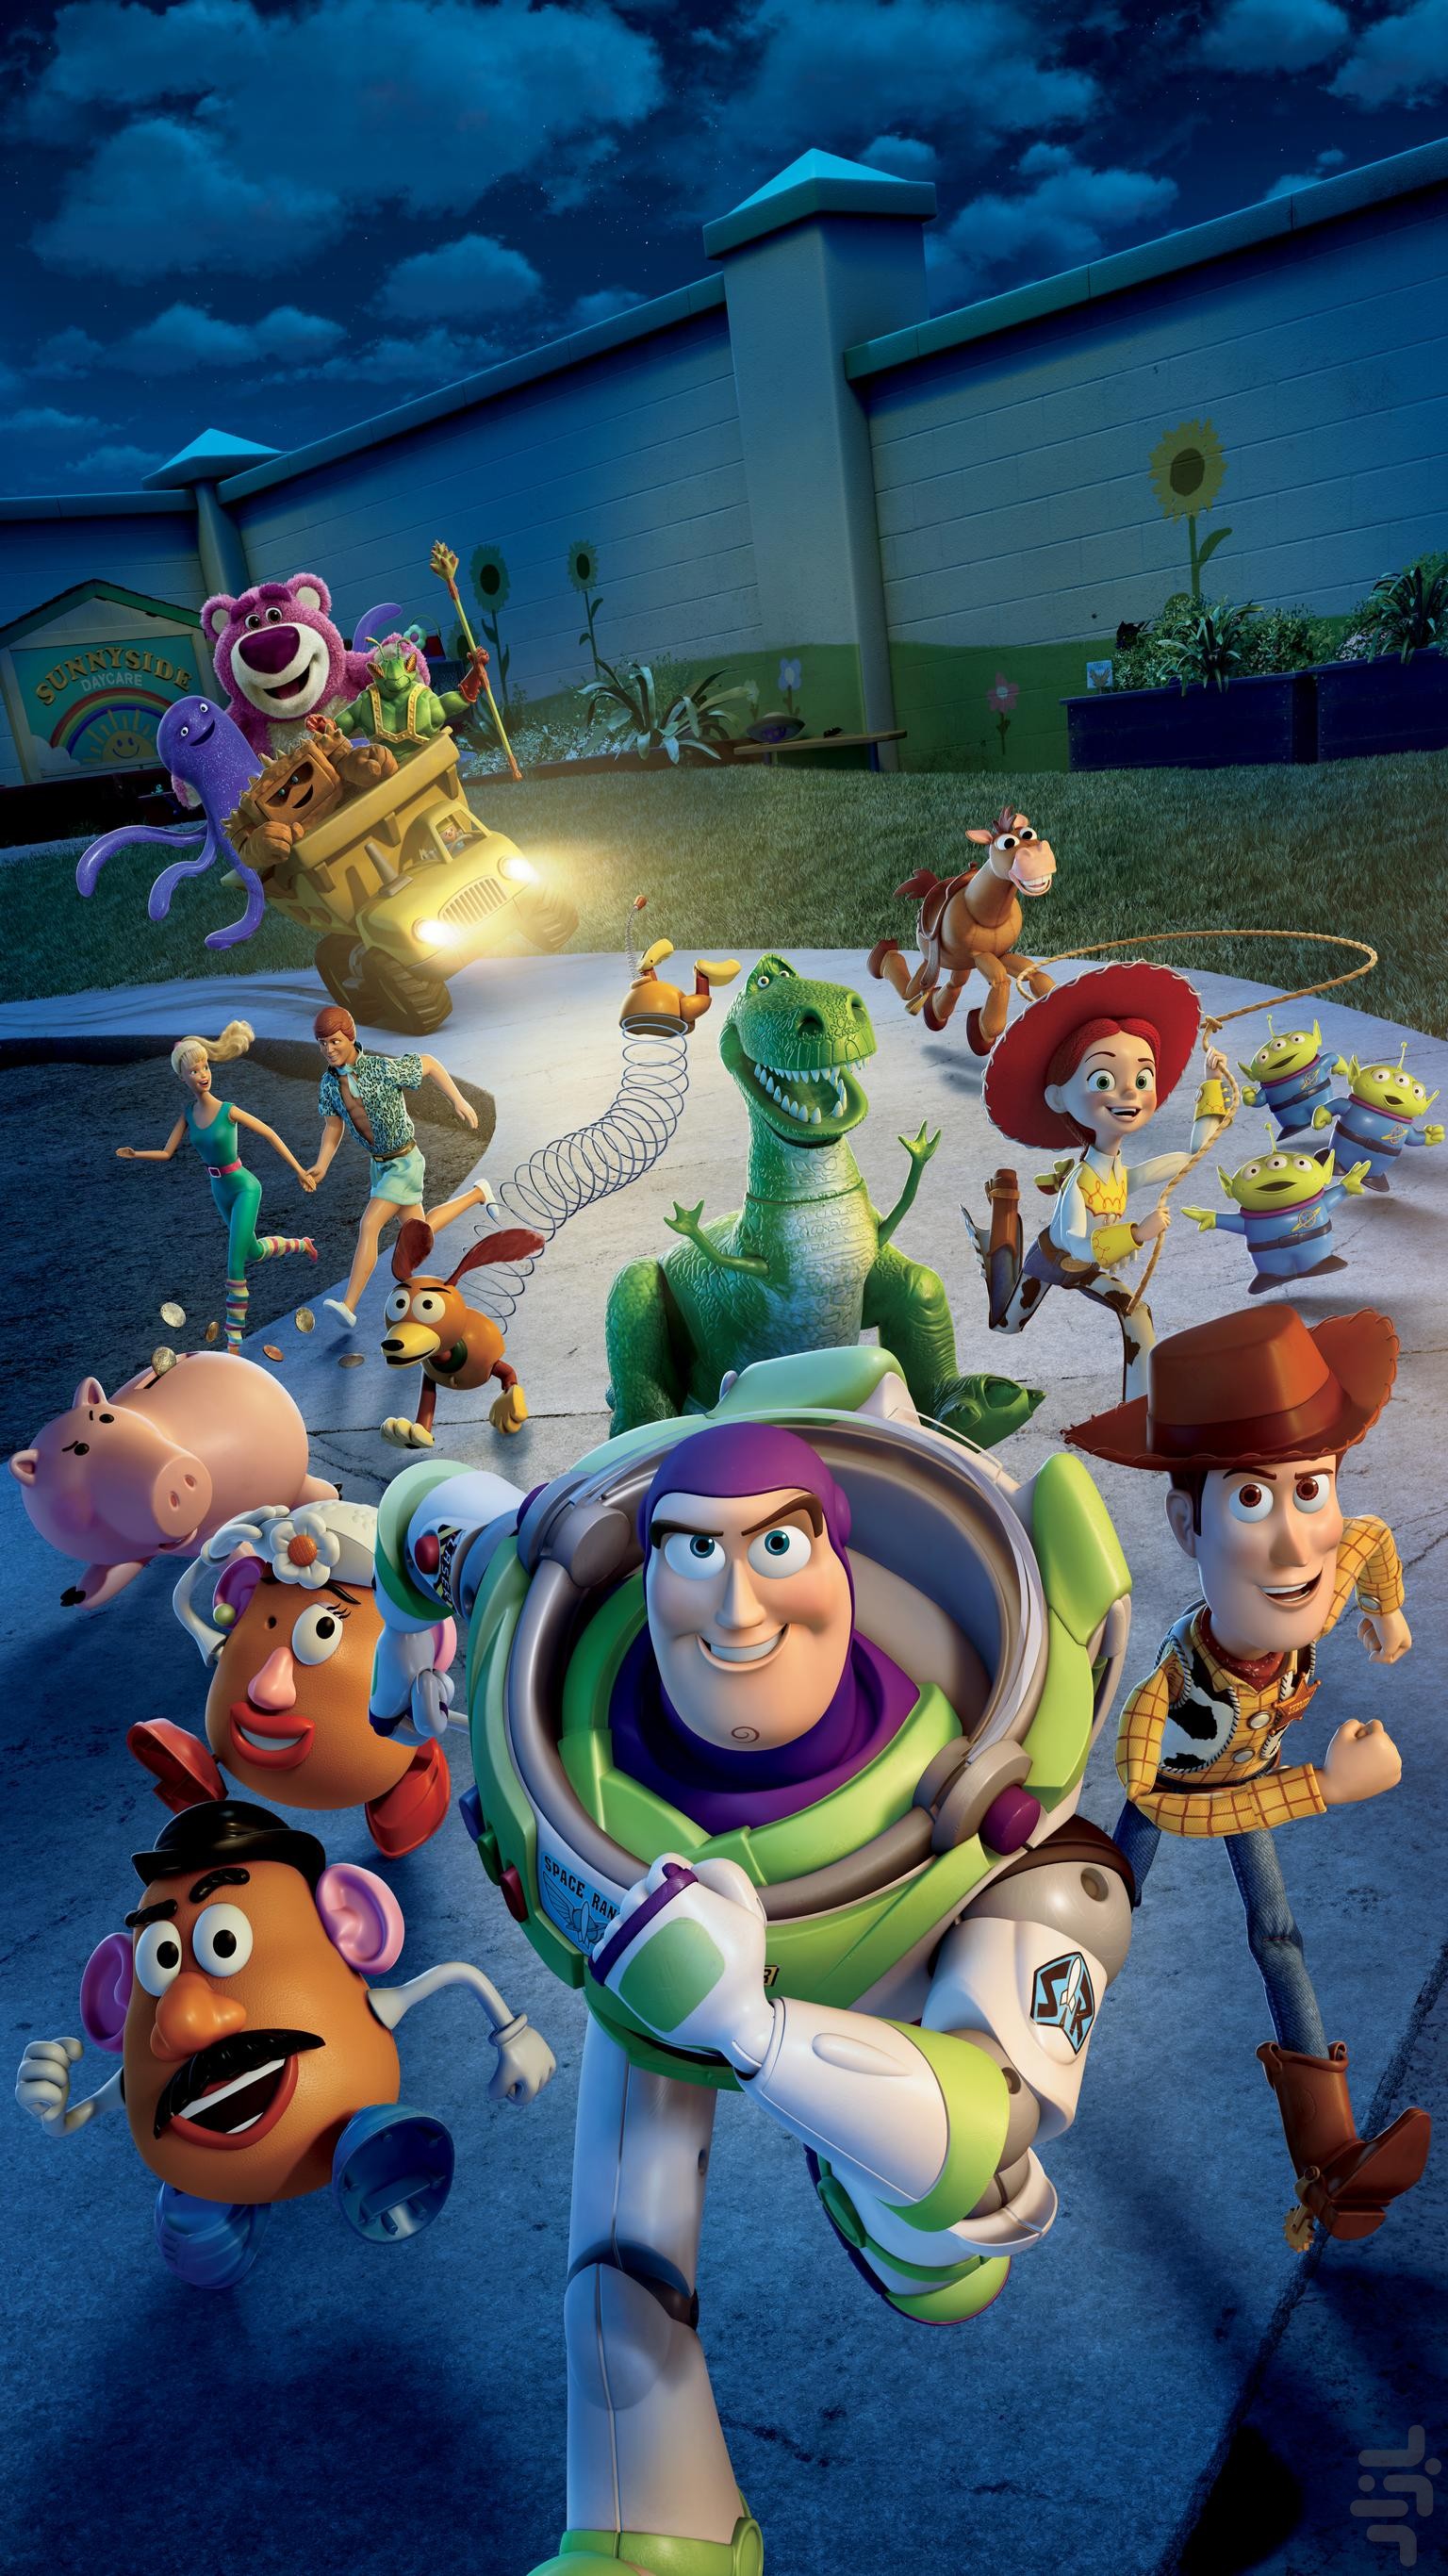 free download toy story 3 game for android